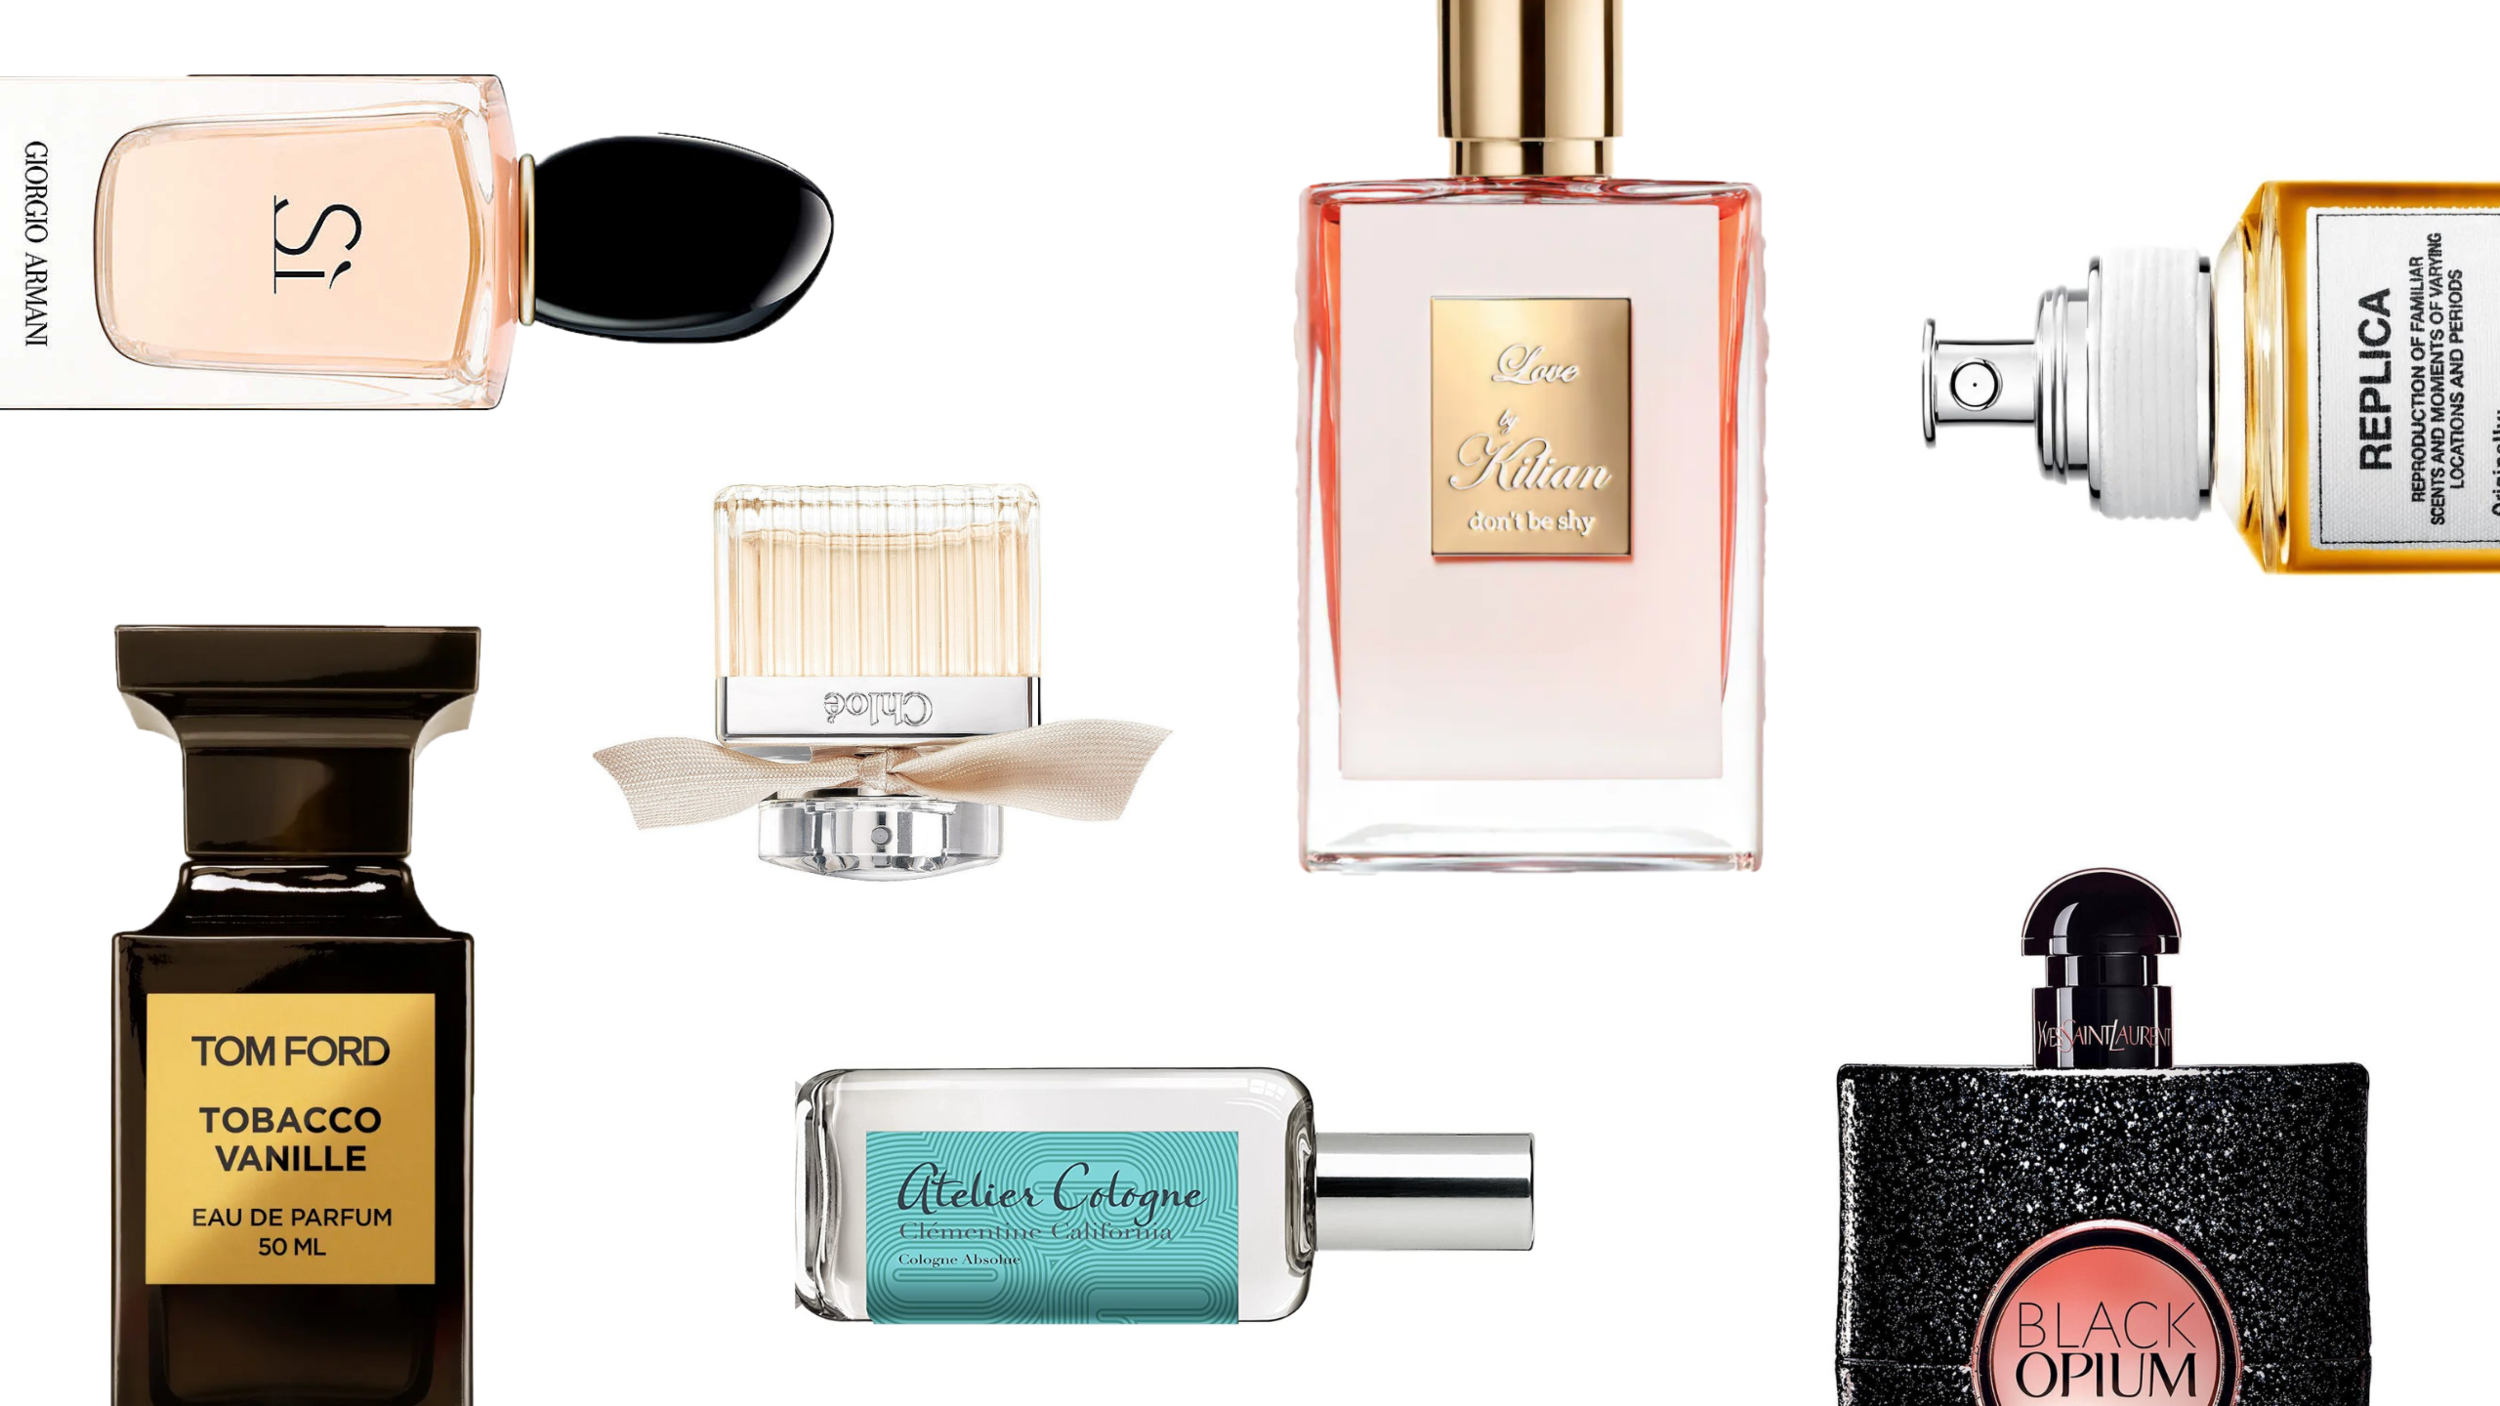 Top 7 Luxury Perfume Brands For Women and Their Best Scents